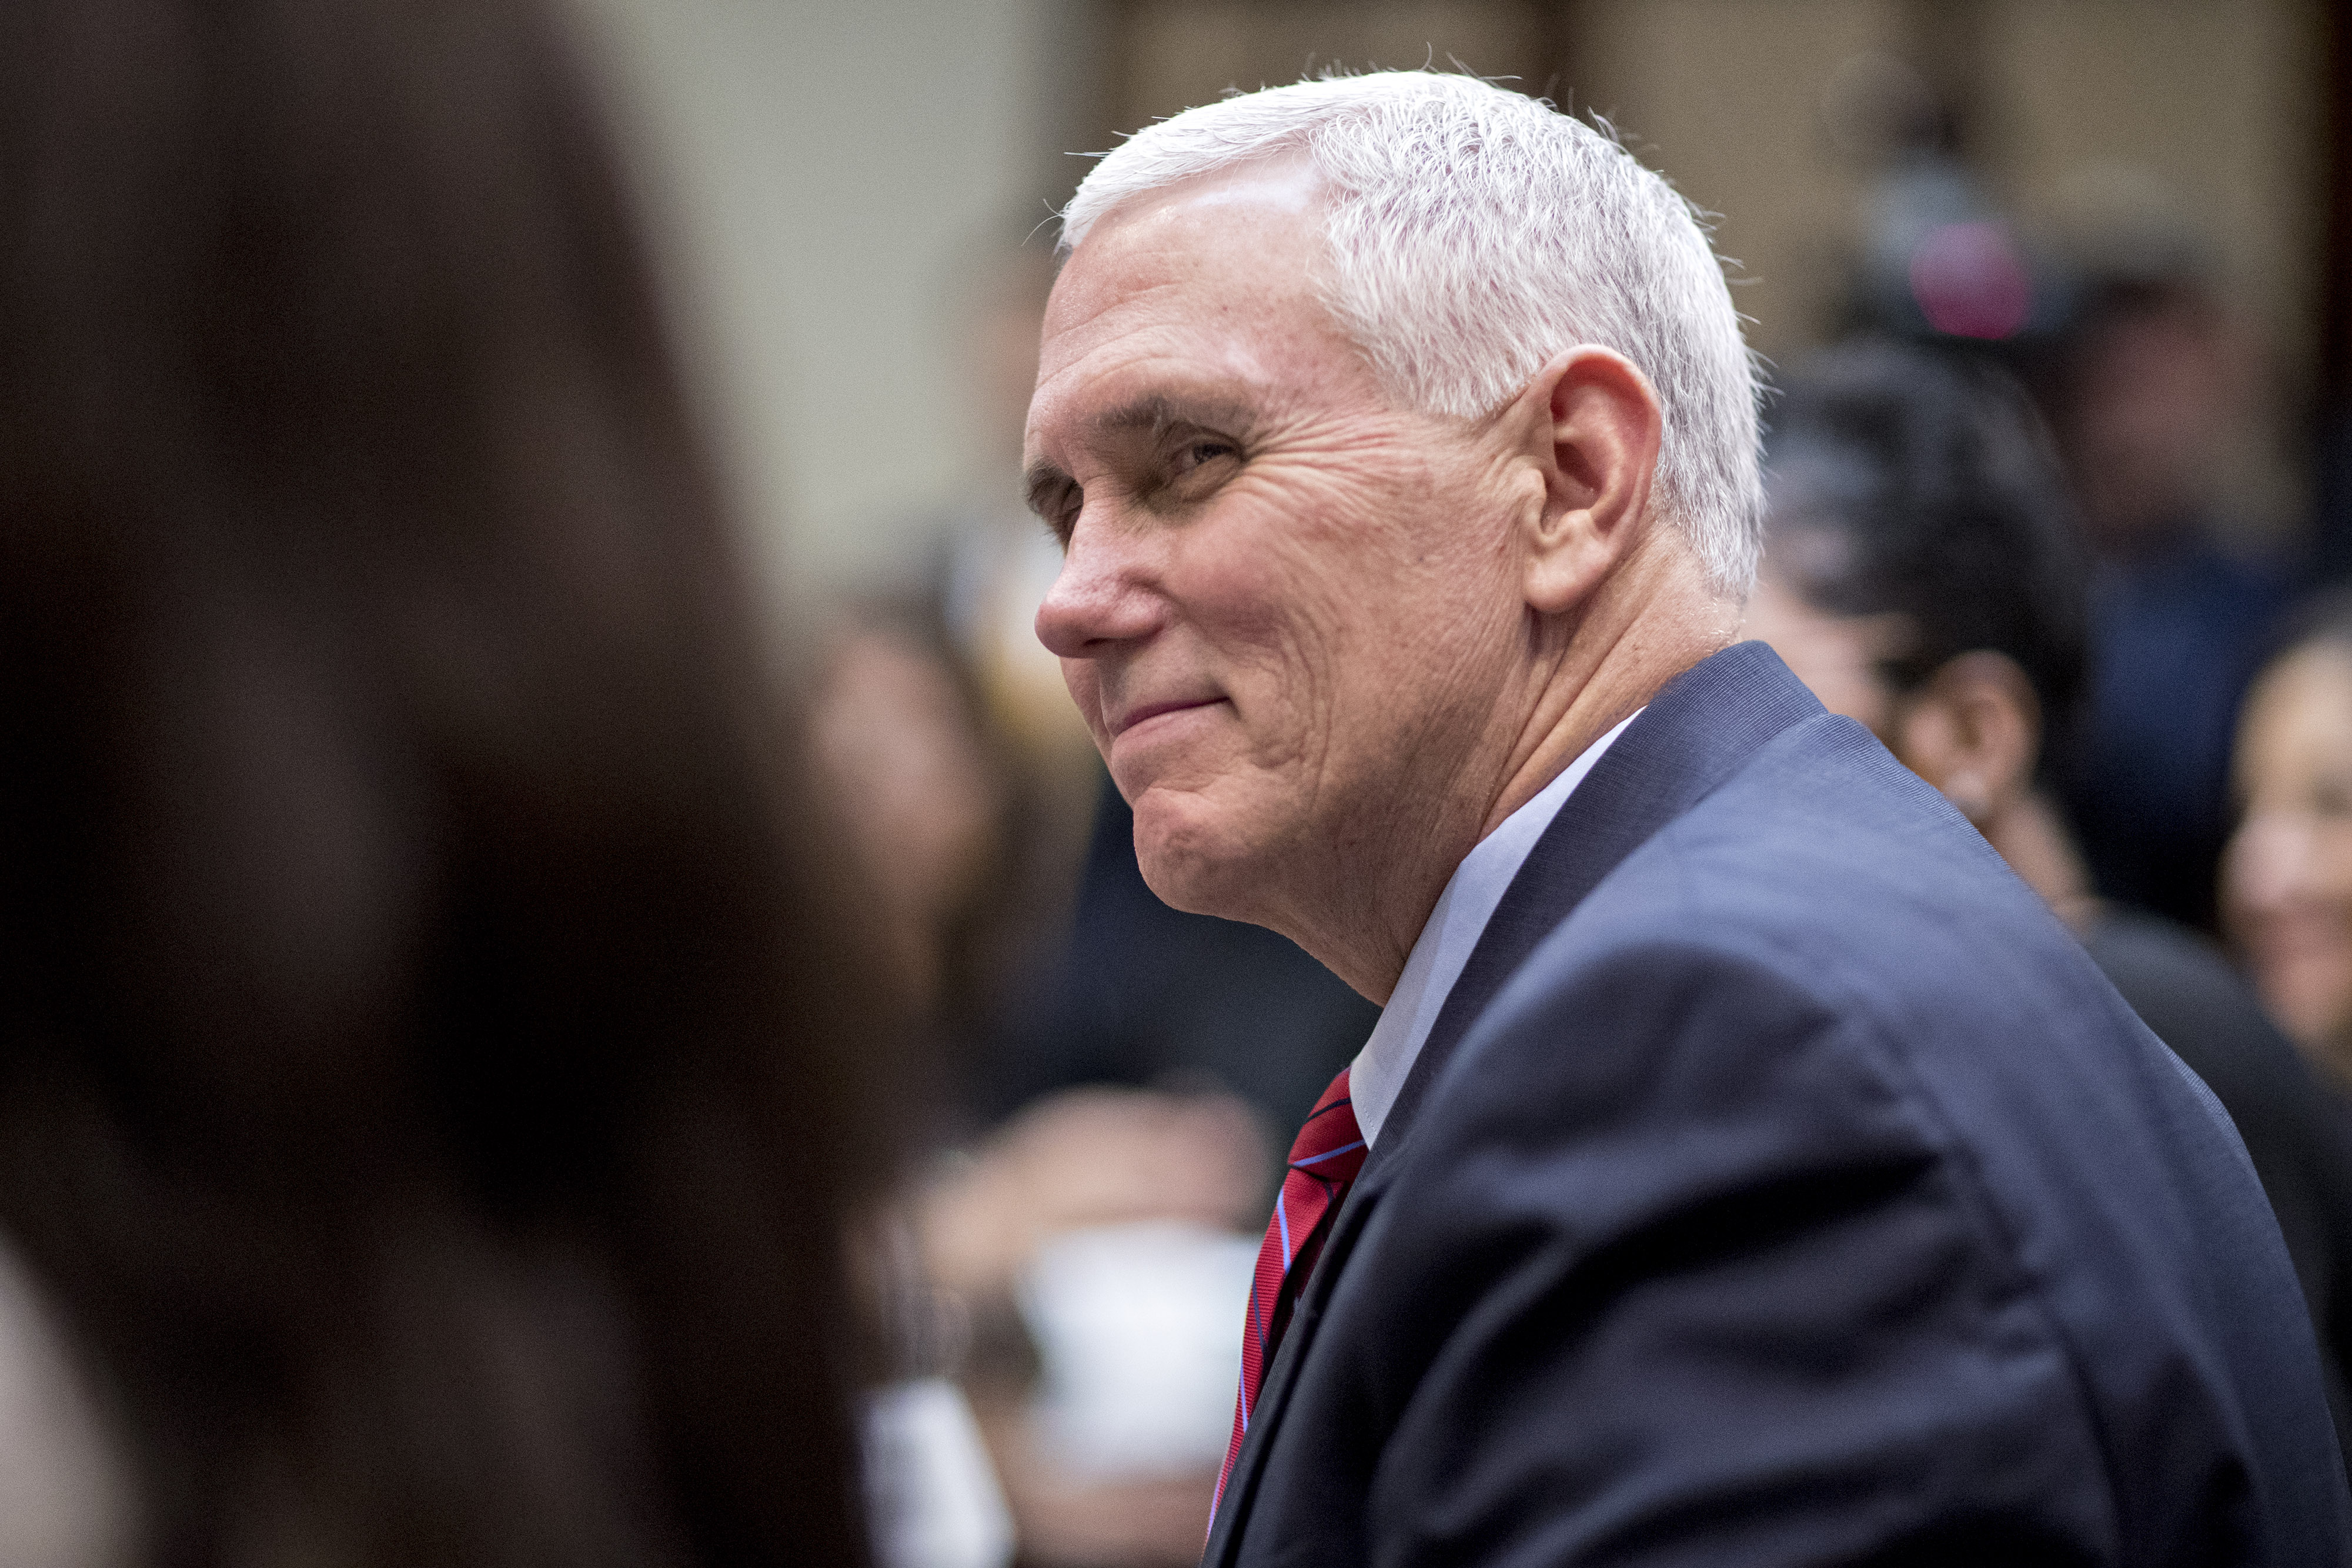 Vice President Pence listens while meeting with women small business owners with U.S. President Donald Trump, on March 27, 2017 in Washington, DC. (Pool—Getty Images)